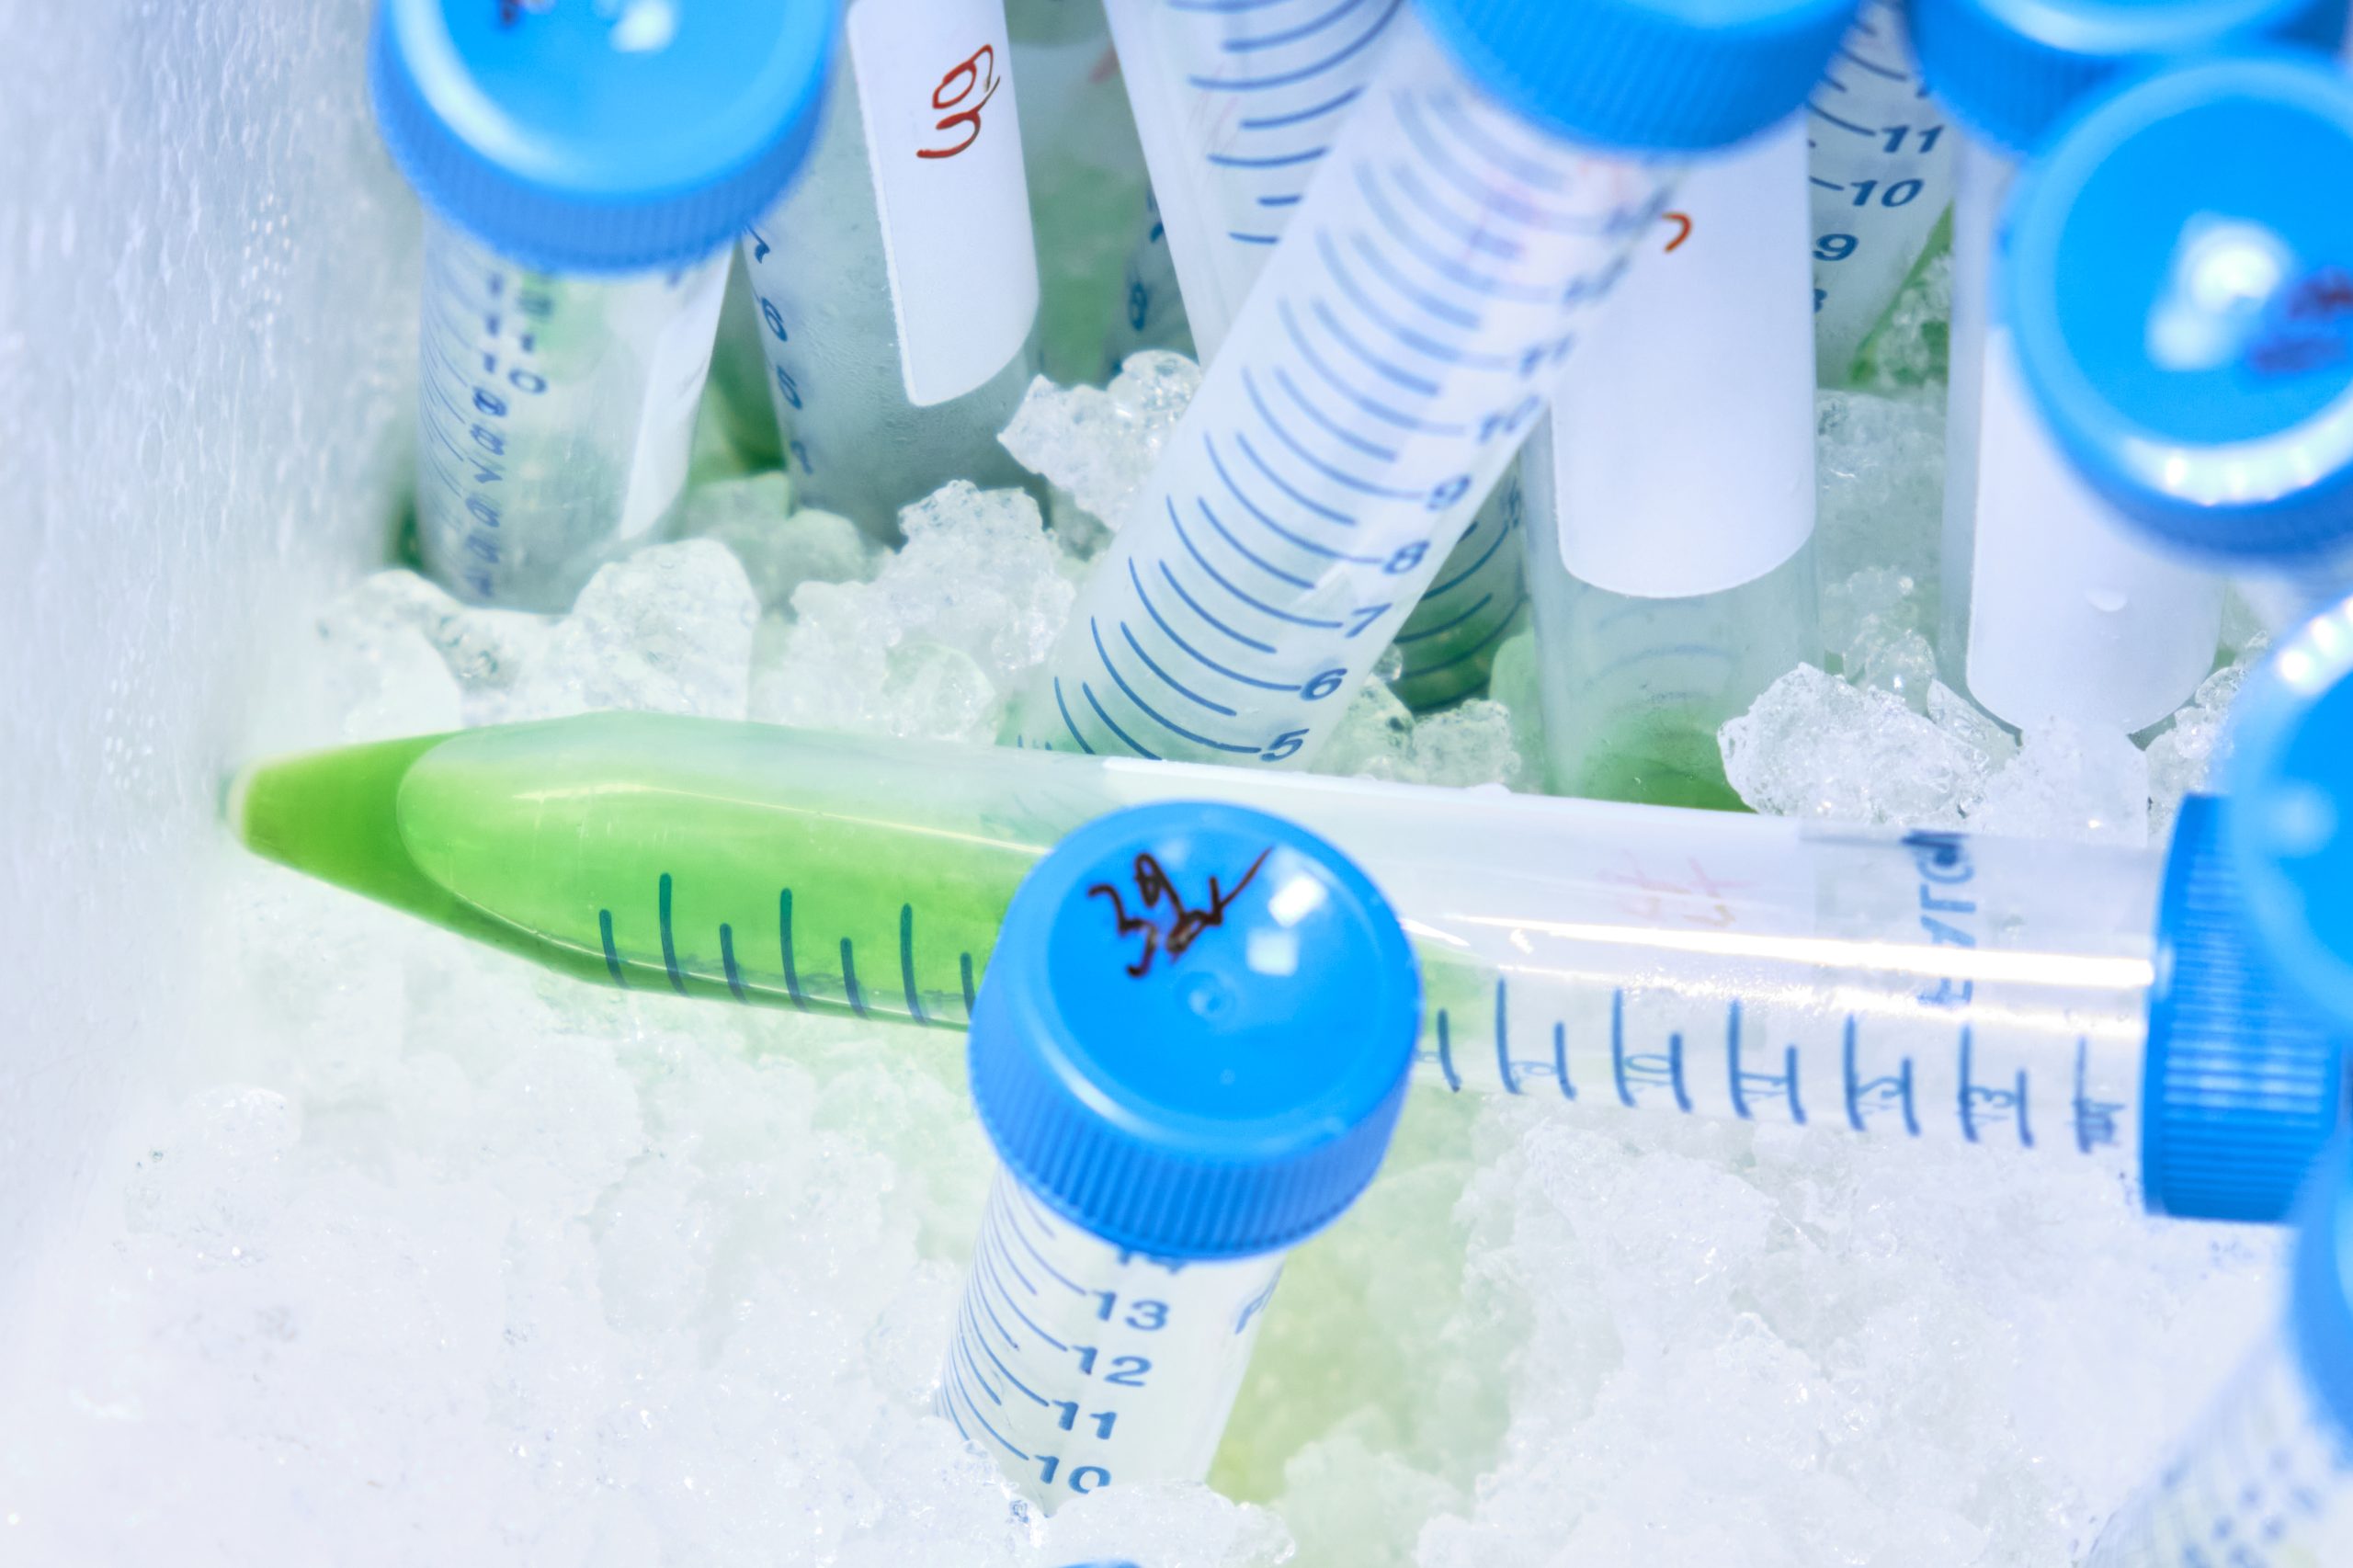 Plastic falcone test tubes with green liquid keep in the ice.